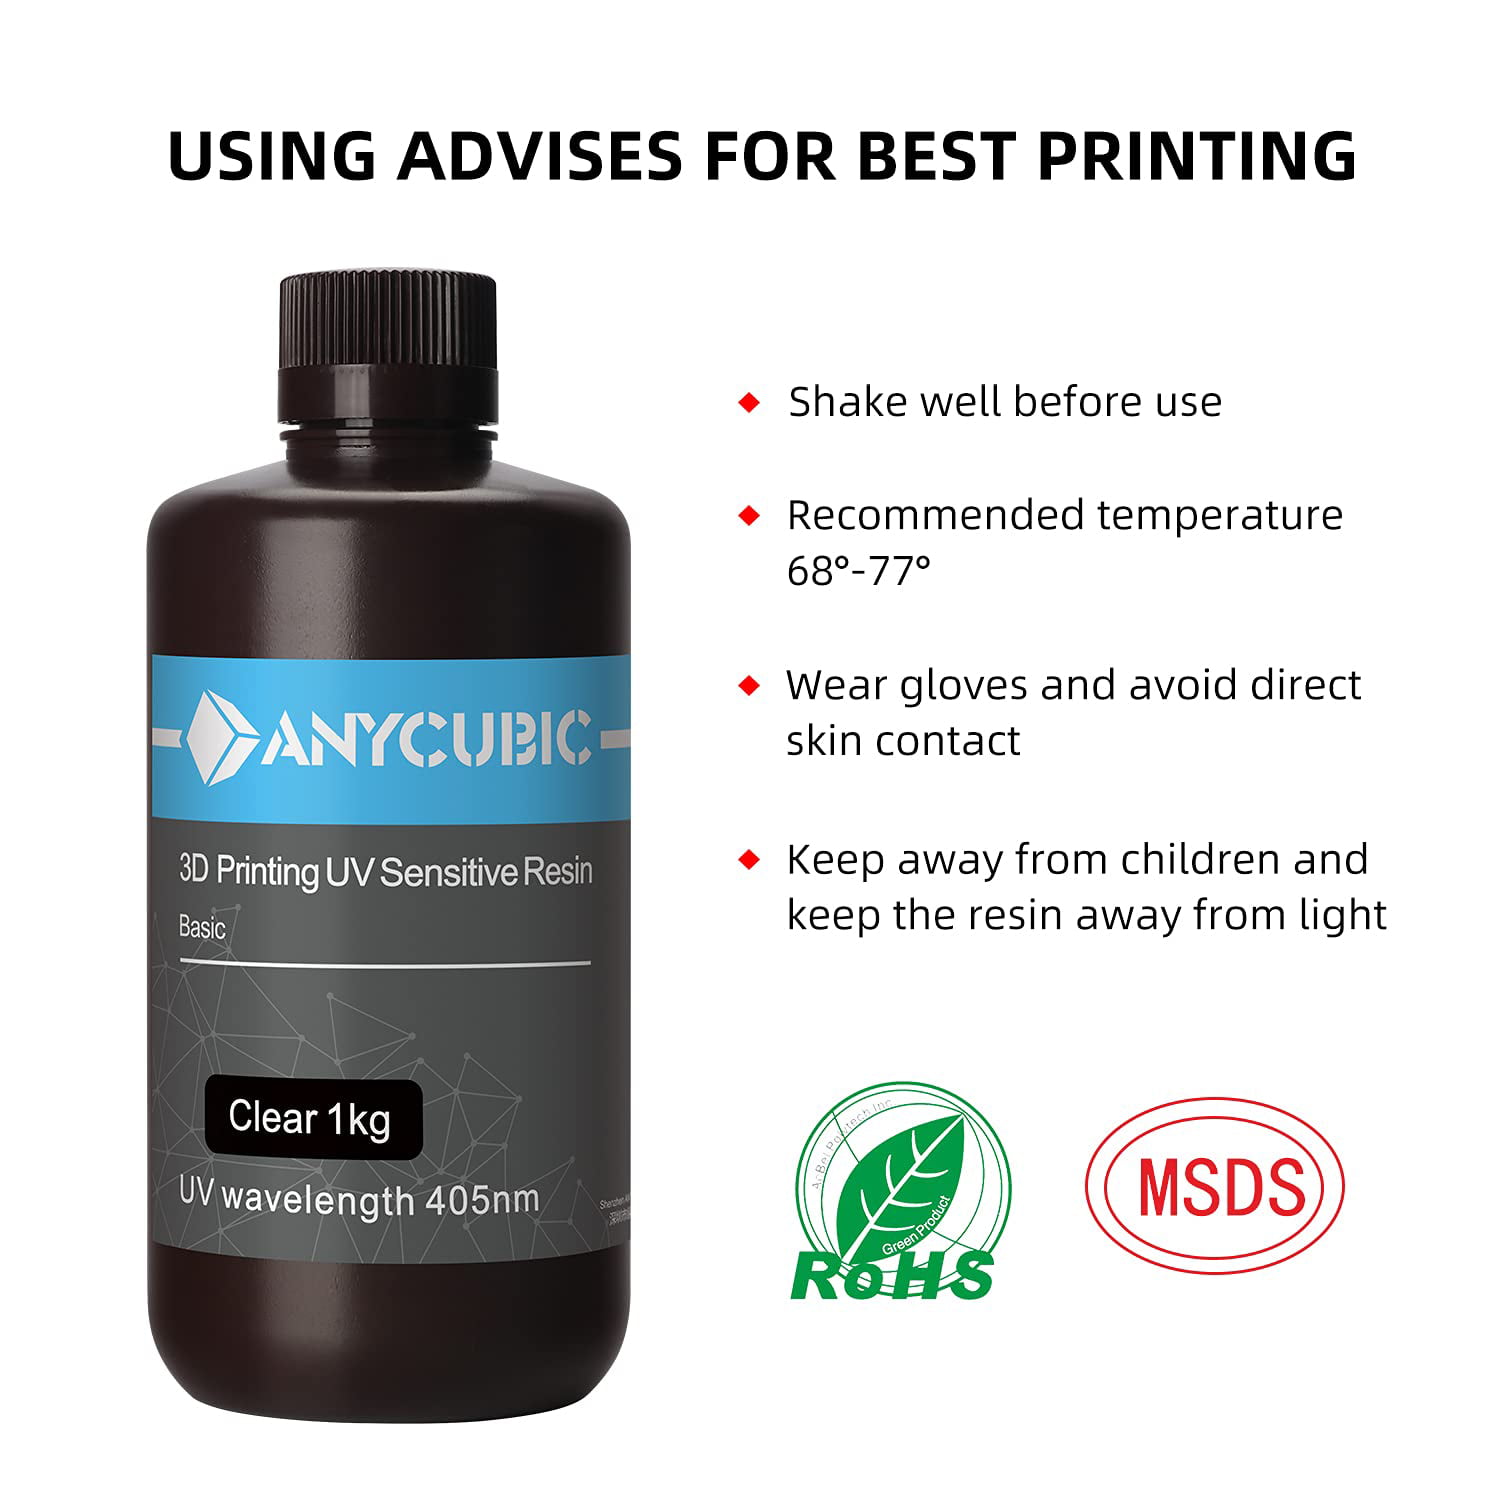 ANYCUBIC 3D Printer Resin, 405nm UV Photopolymer Resin for